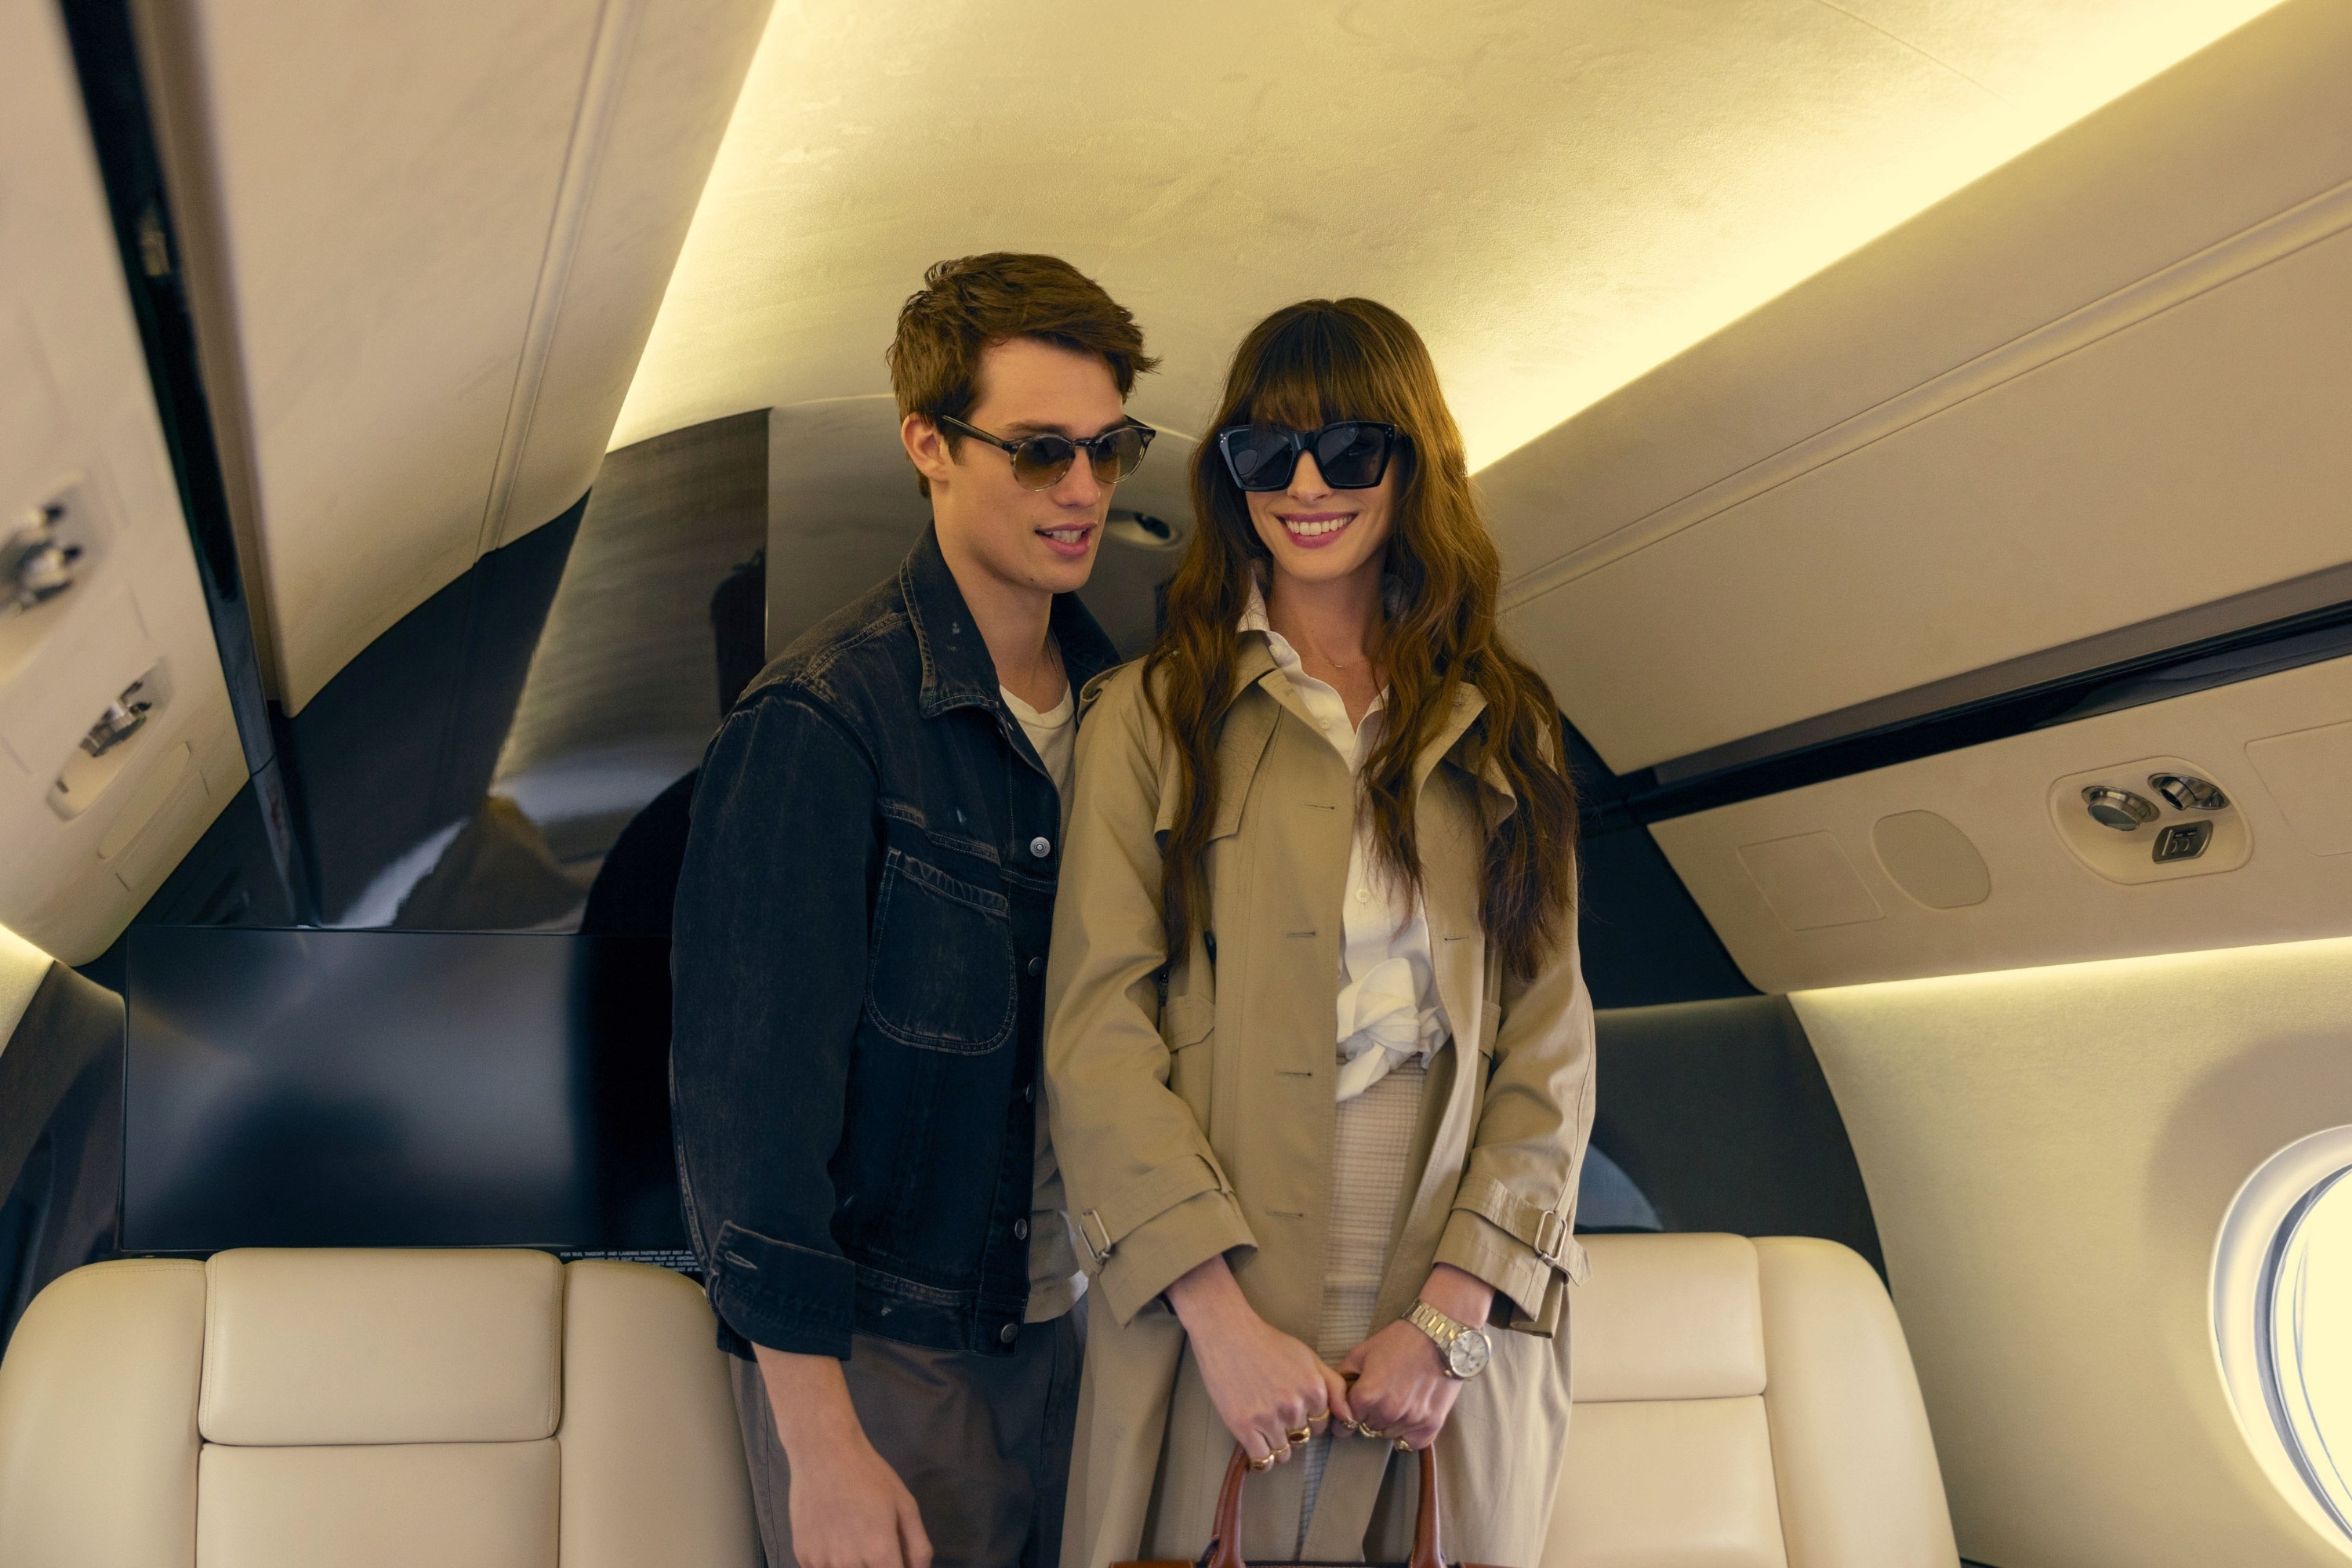 Two actors portraying characters on a TV show inside a private jet, smiling and holding hands